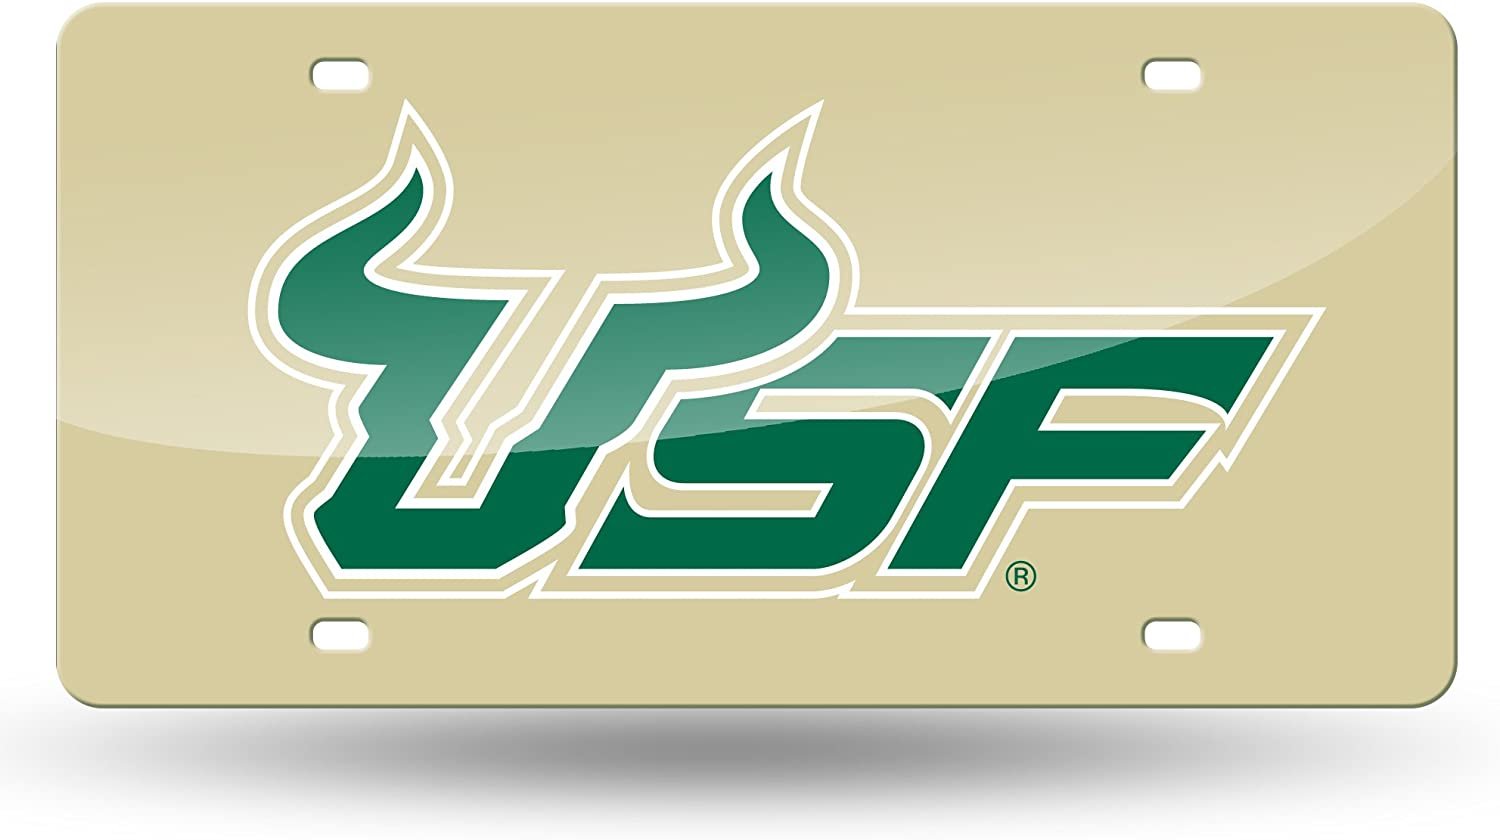 University of South Florida Bulls USF Premium Laser Cut Tag License Plate, Gold Mirrored Acrylic Inlaid, 12x6 Inch